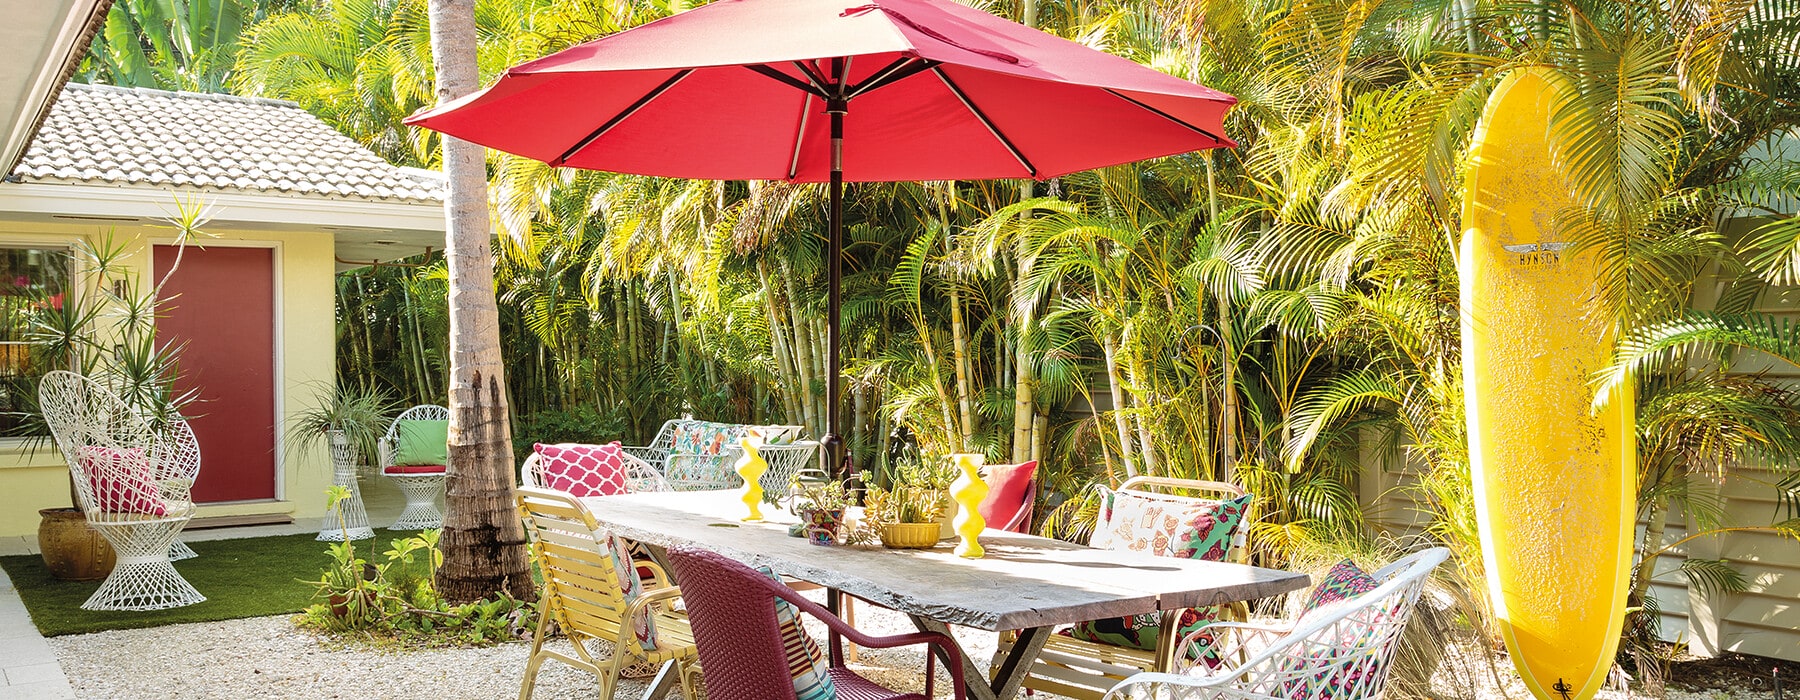 Outside dining area with yellow surfboard and red umbrella